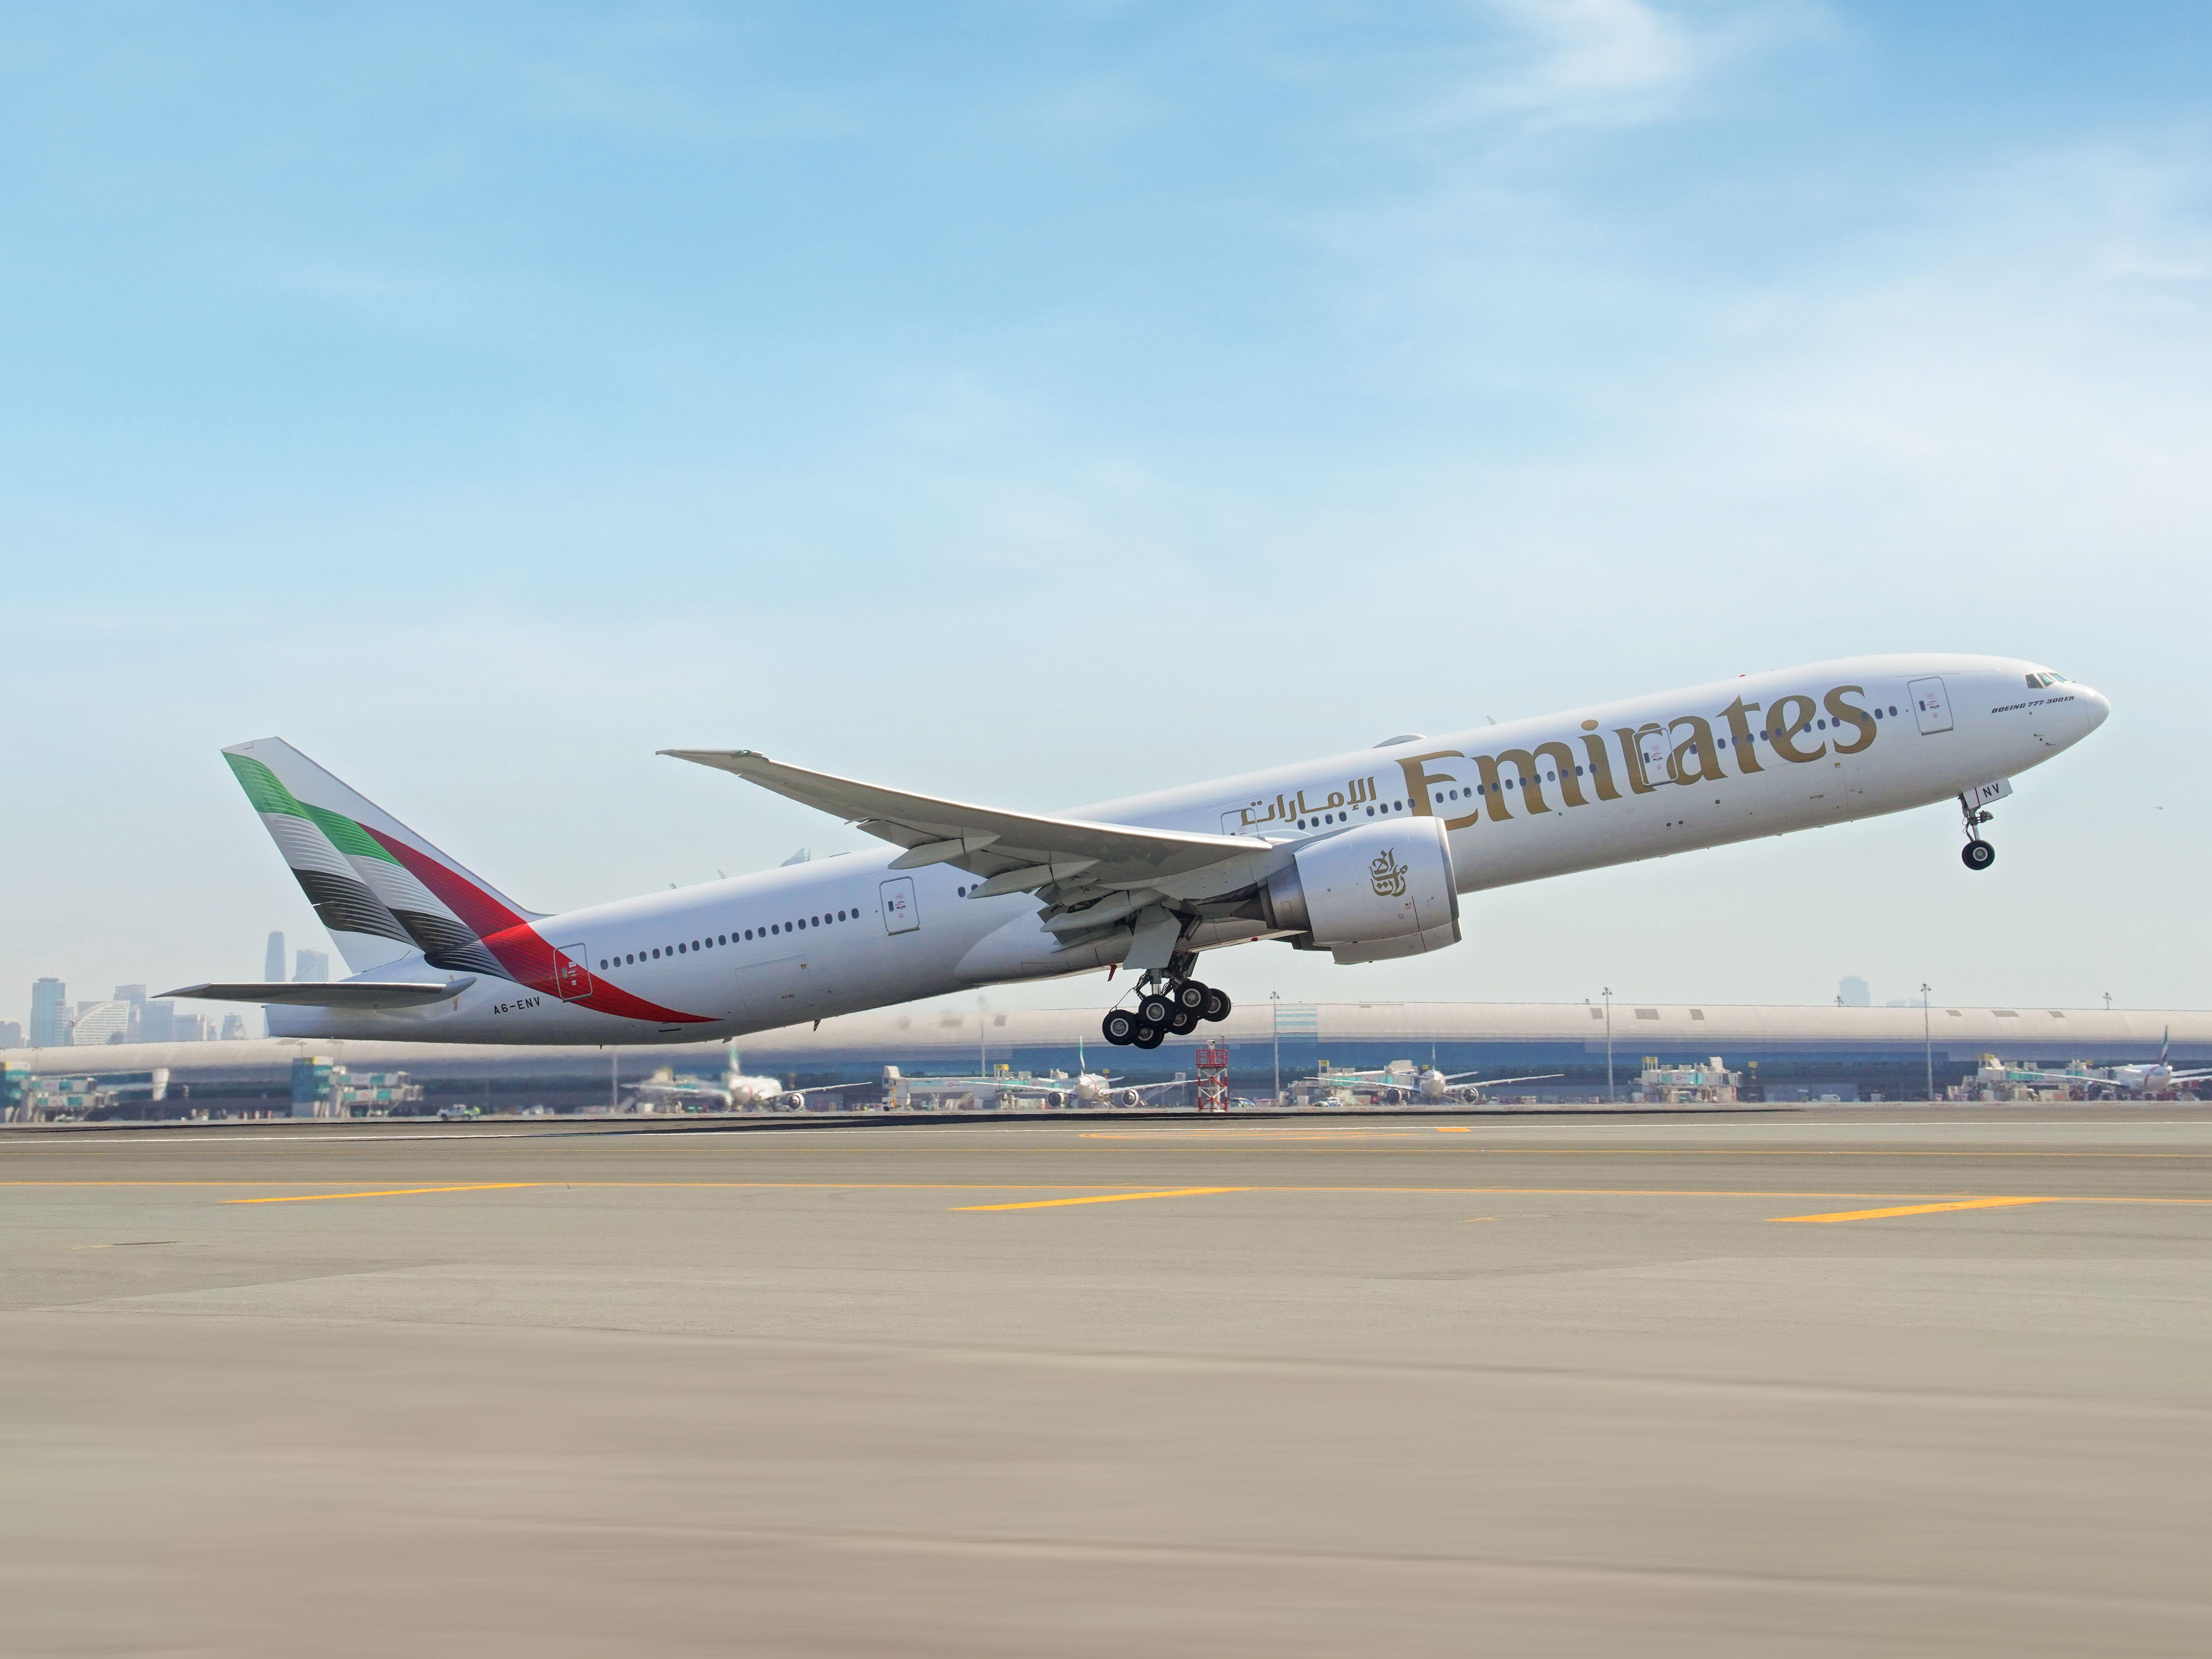 Emirates Boeing 777 aircraft taking off